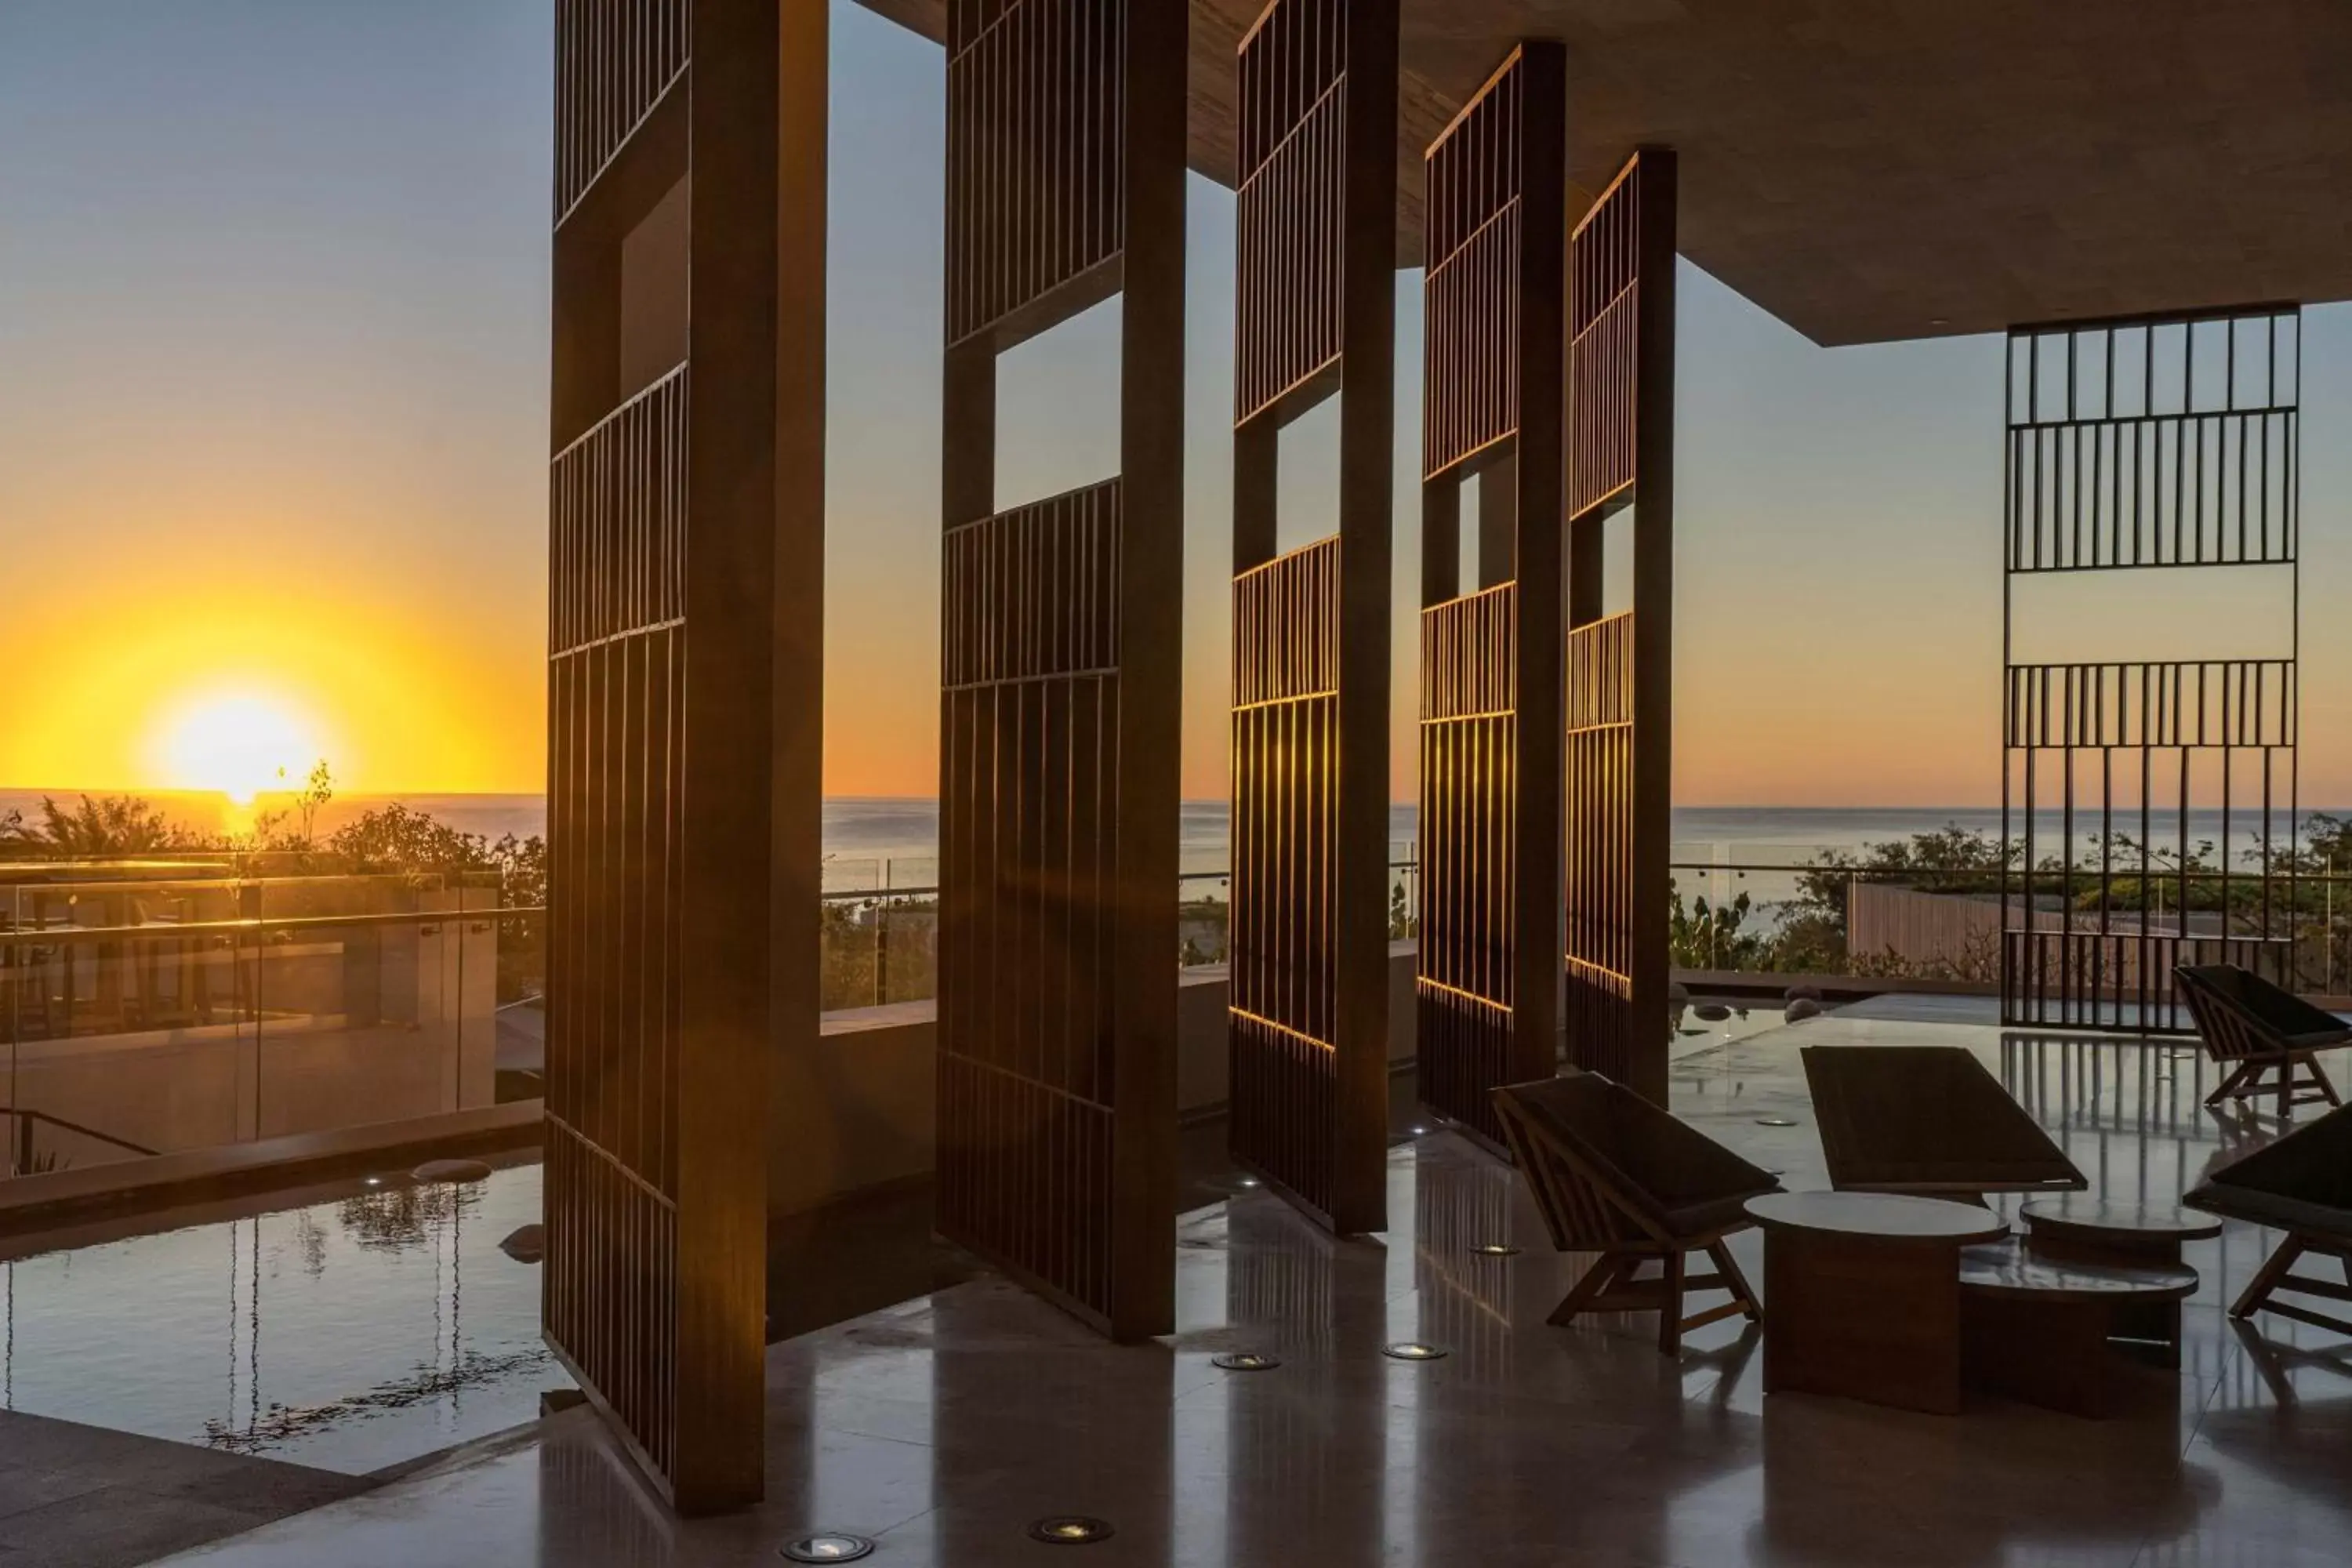 Property building, Sunrise/Sunset in Solaz, a Luxury Collection Resort, Los Cabos